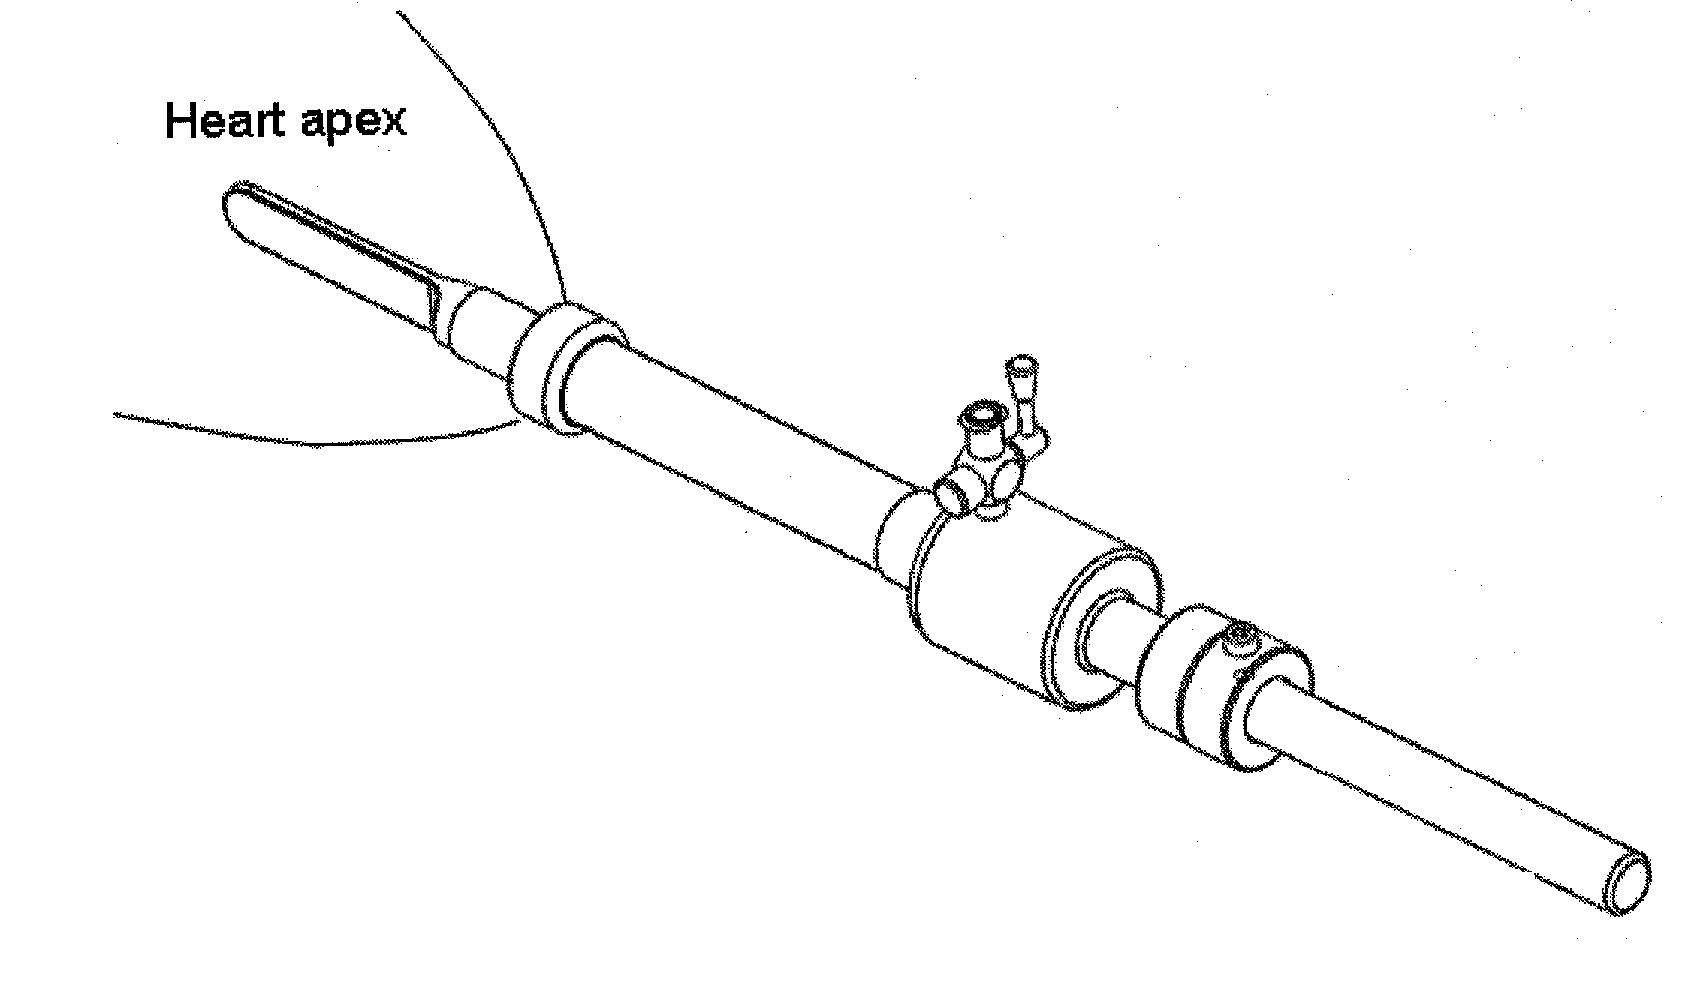 System and method for assisting the positioning of medical instruments